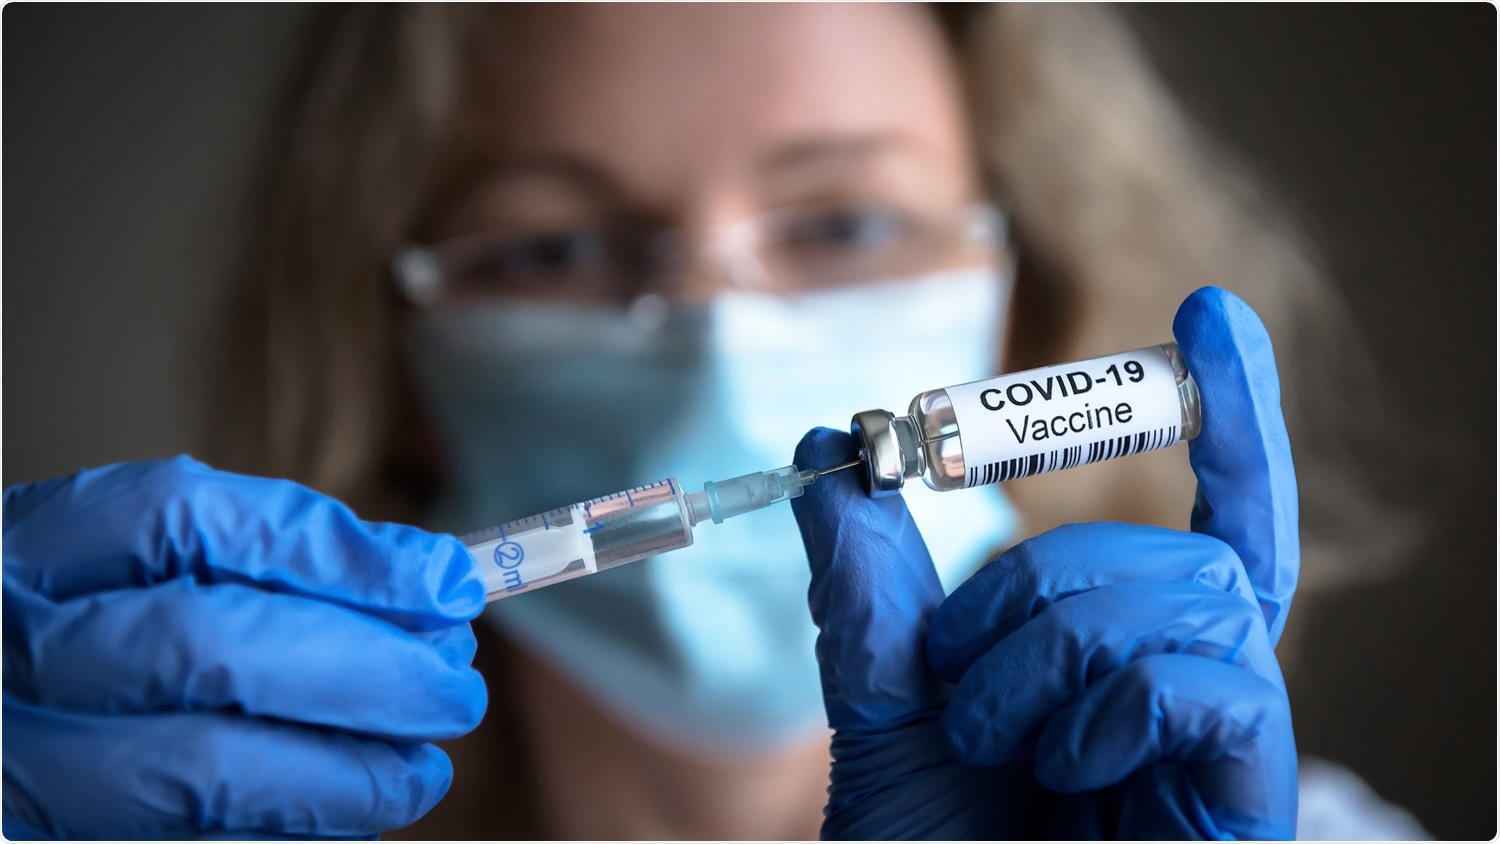 Study: Virological characteristics of SARS-CoV-2 vaccine breakthrough infections in health care workers. Image Credit: Viacheslav Lopatin/Shutterstock